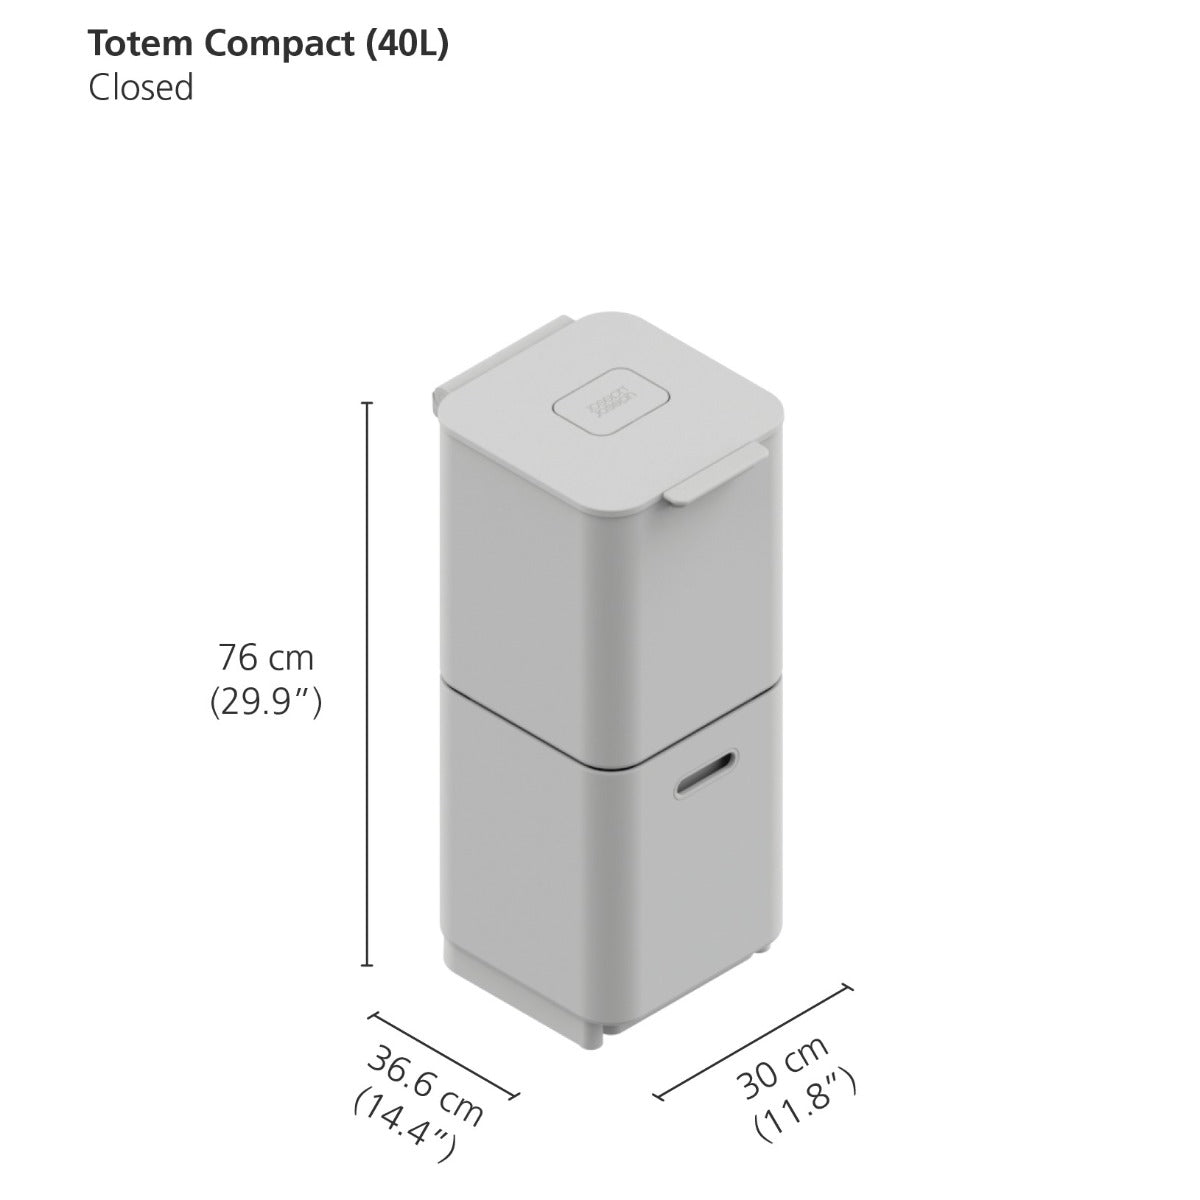 Joseph Joseph 3-Compartment Totem Compact 40L Recycling Bin: Stainless Steel